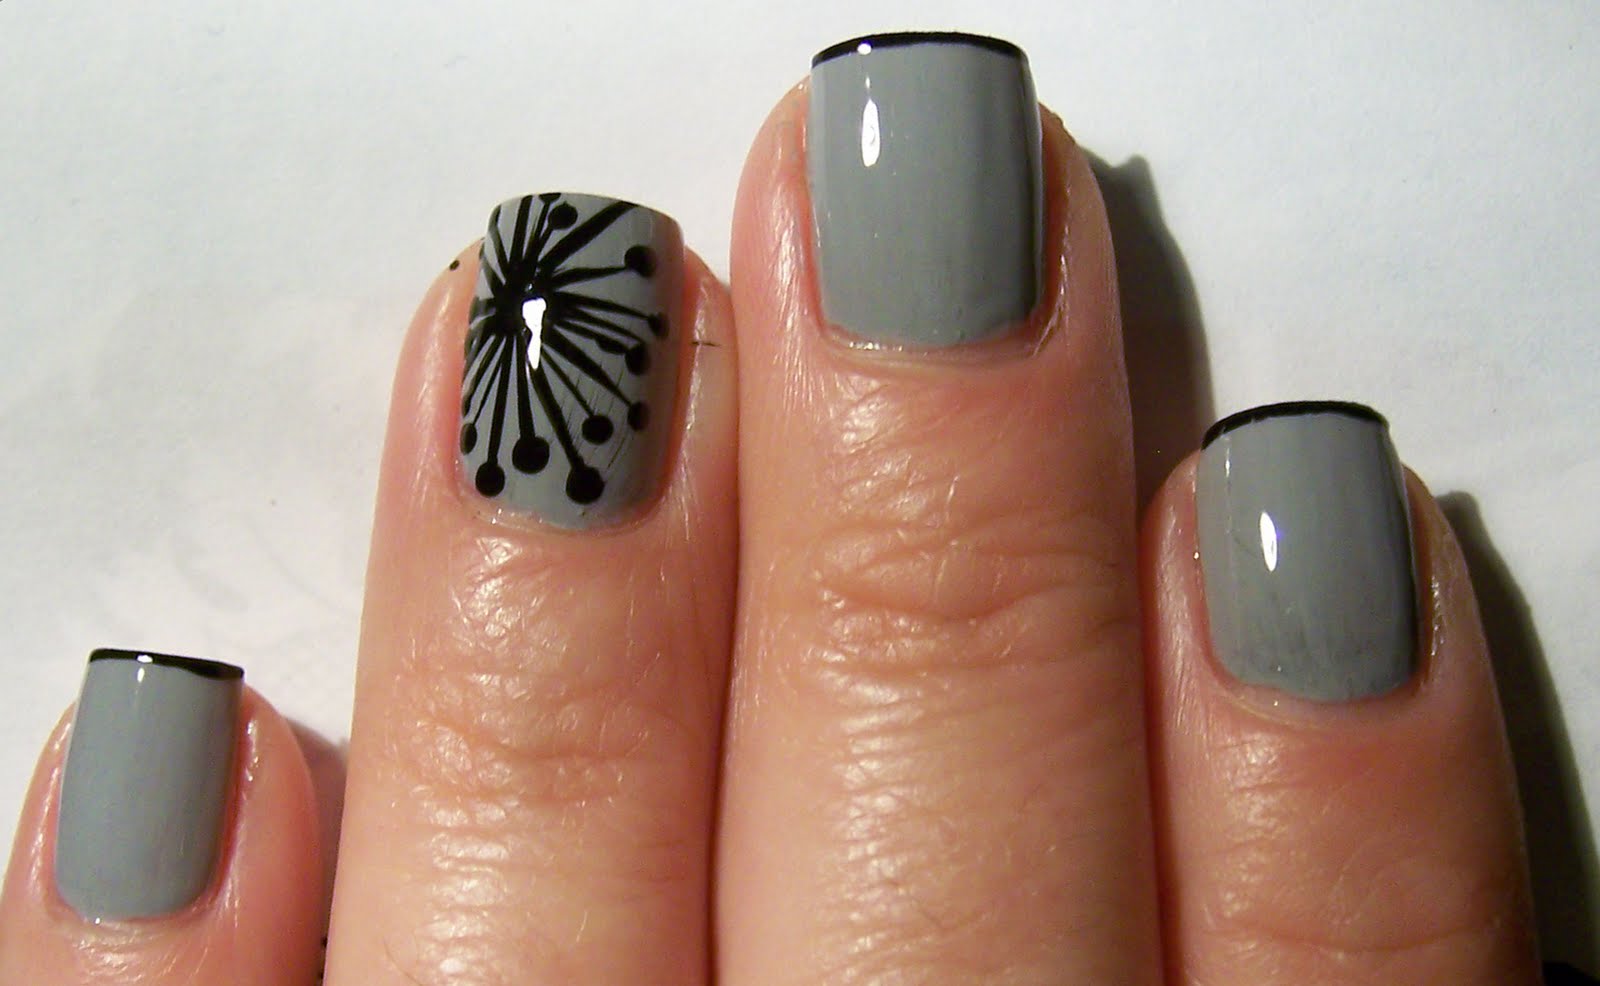 2. Modern Nail Art Tutorial with Step-by-Step Instructions - wide 11